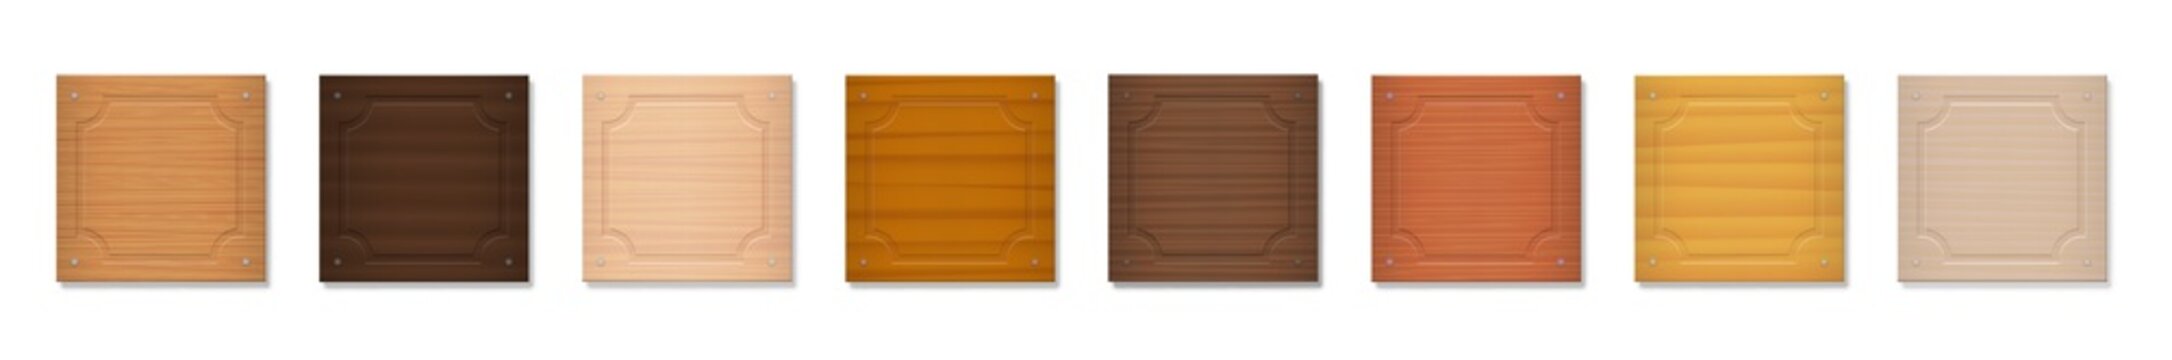 Wooden badges, square format nameplates, blank nametags. Collection with different colors and textures from various trees - brown, dark, gray, light, red, yellow, orange - vector on white background.